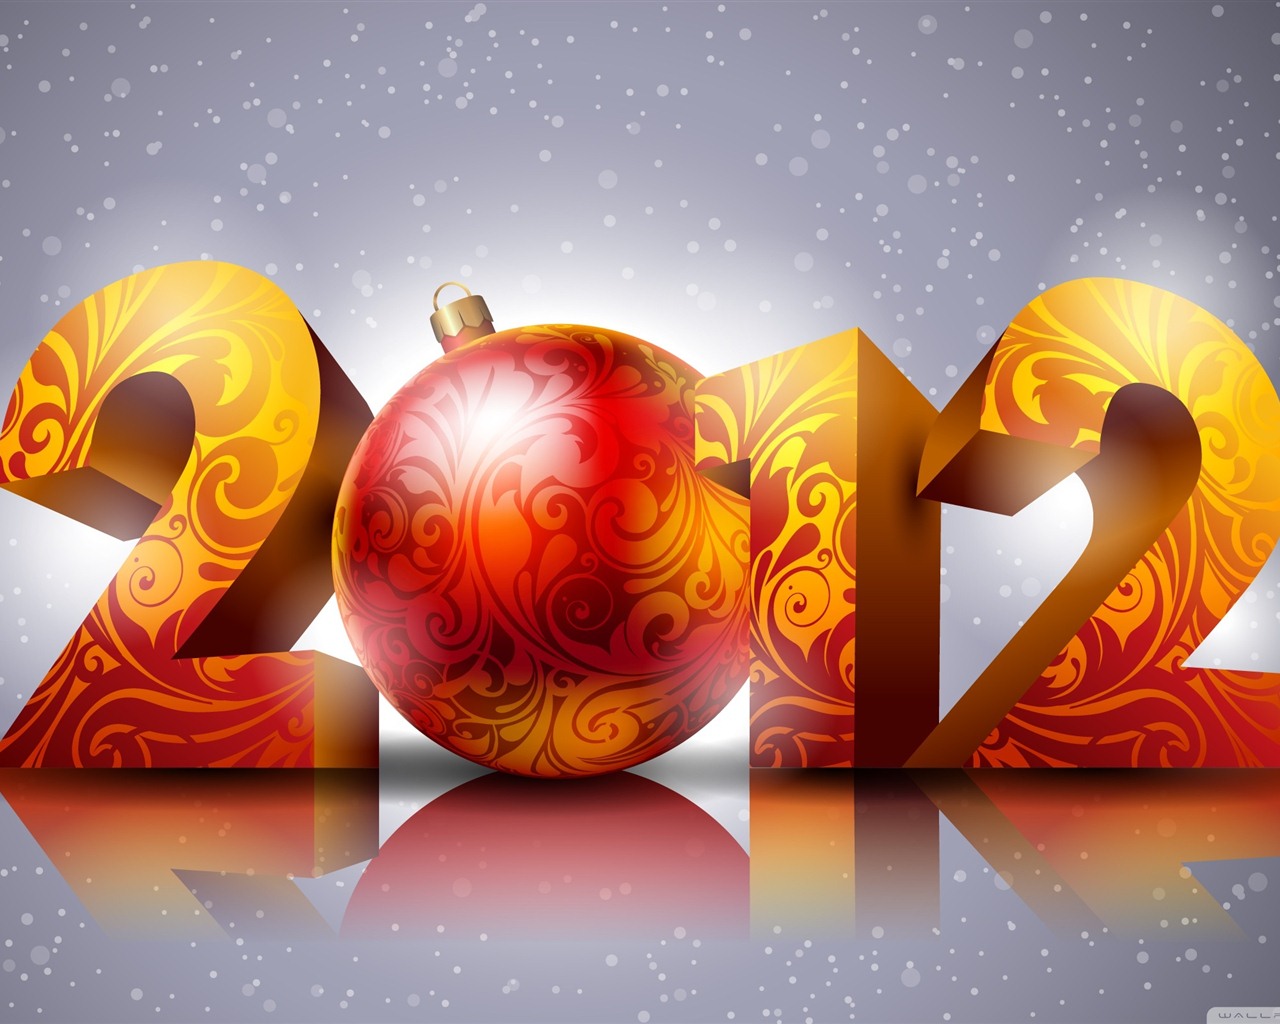 2012 New Year wallpapers (1) #10 - 1280x1024